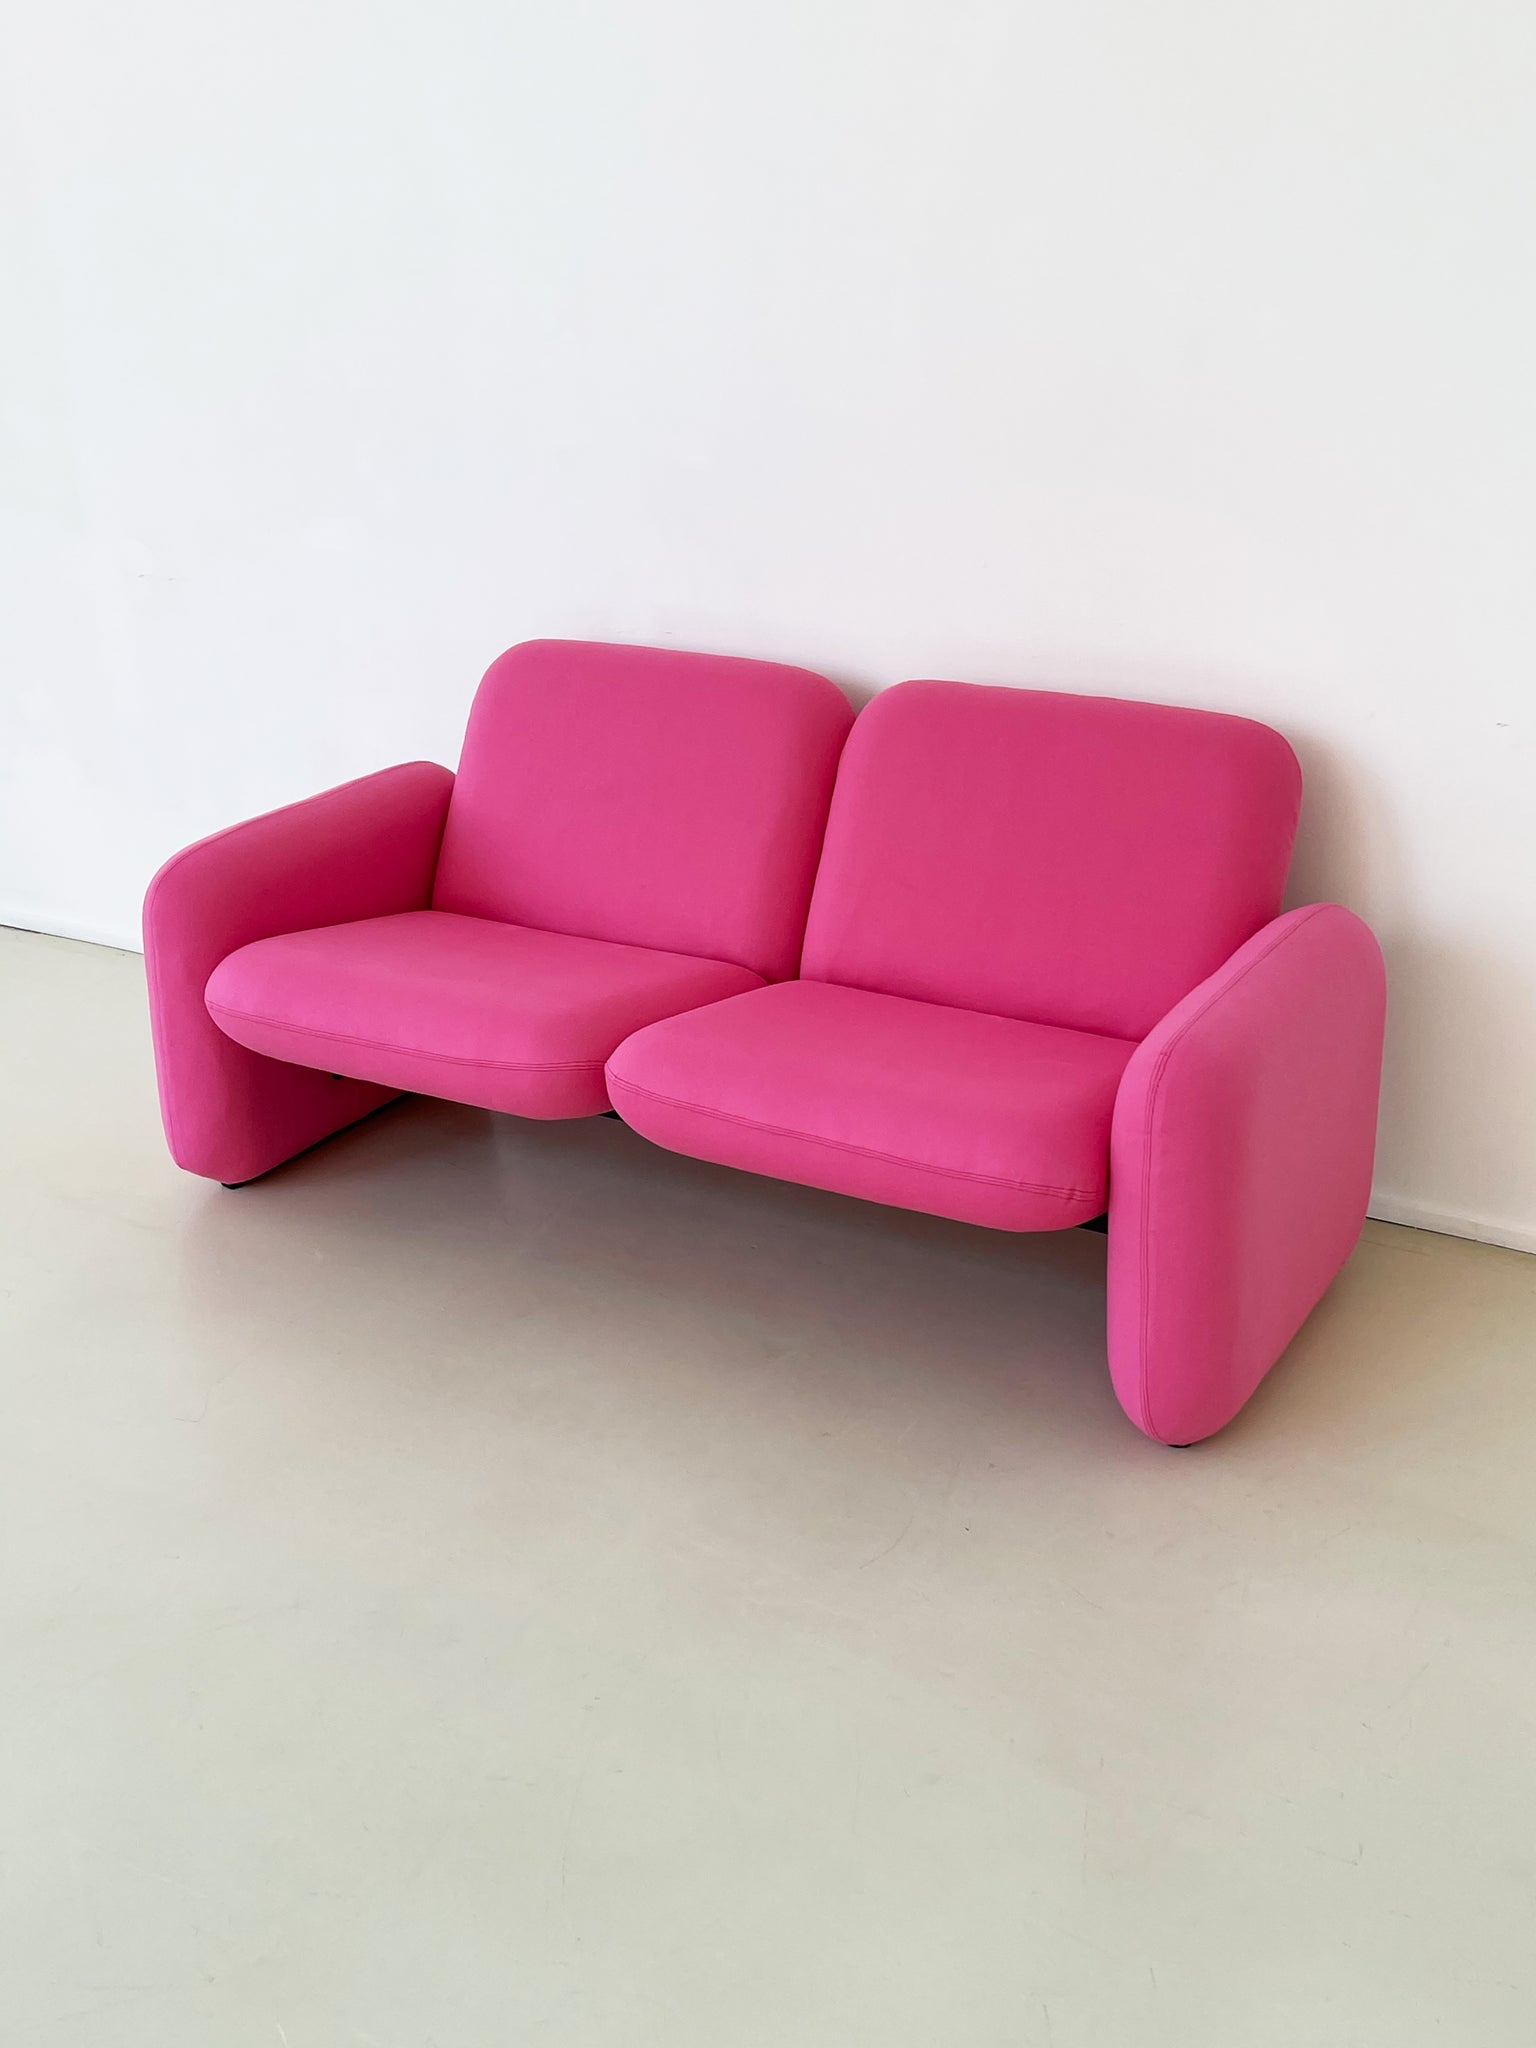 1970s Ray Wilkes Bubble Gum Pink Cashmere Chiclet Sofa